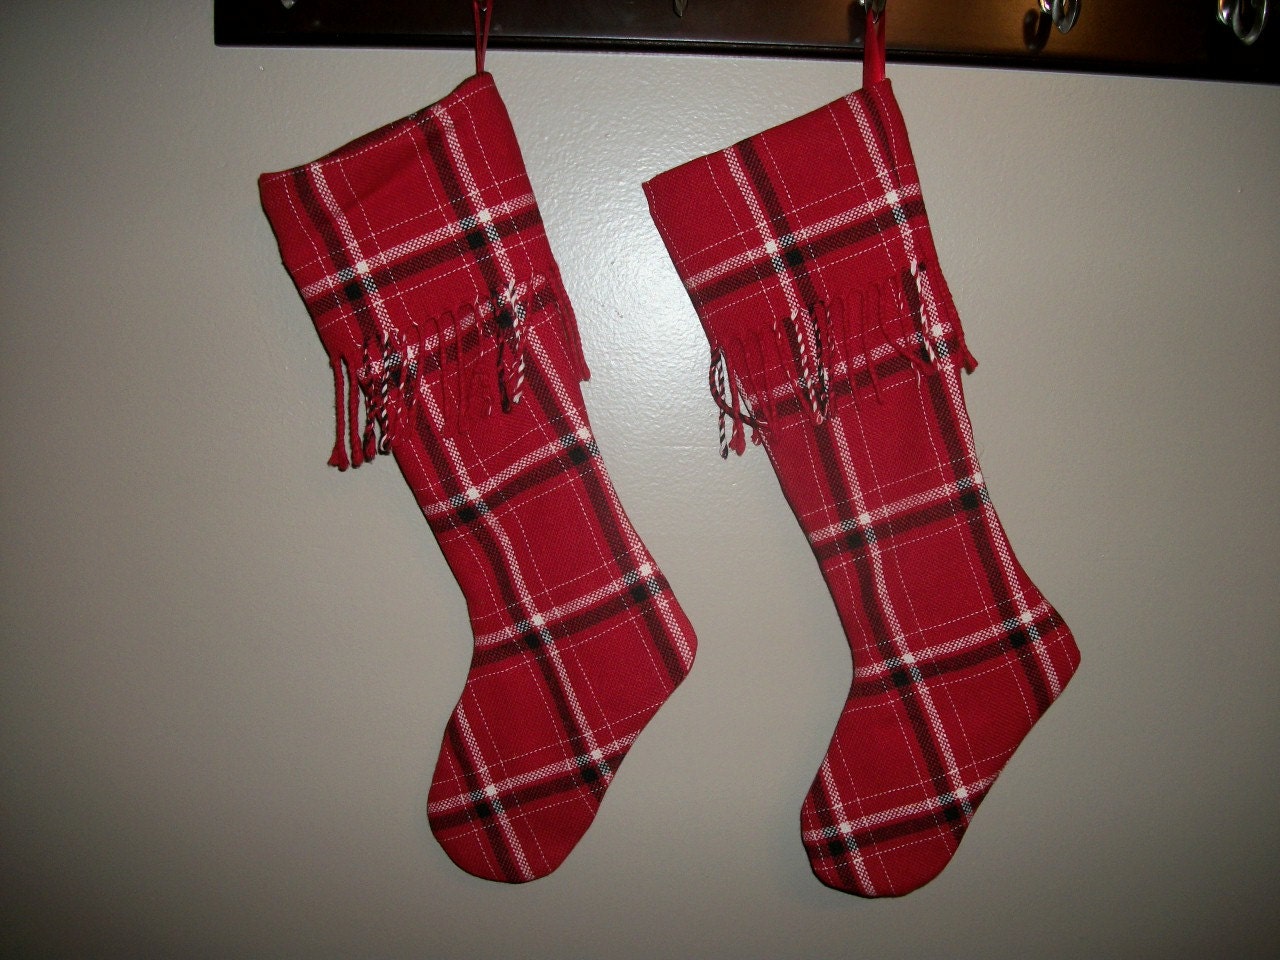 A pair of upcycled Traditional Christmas stockings